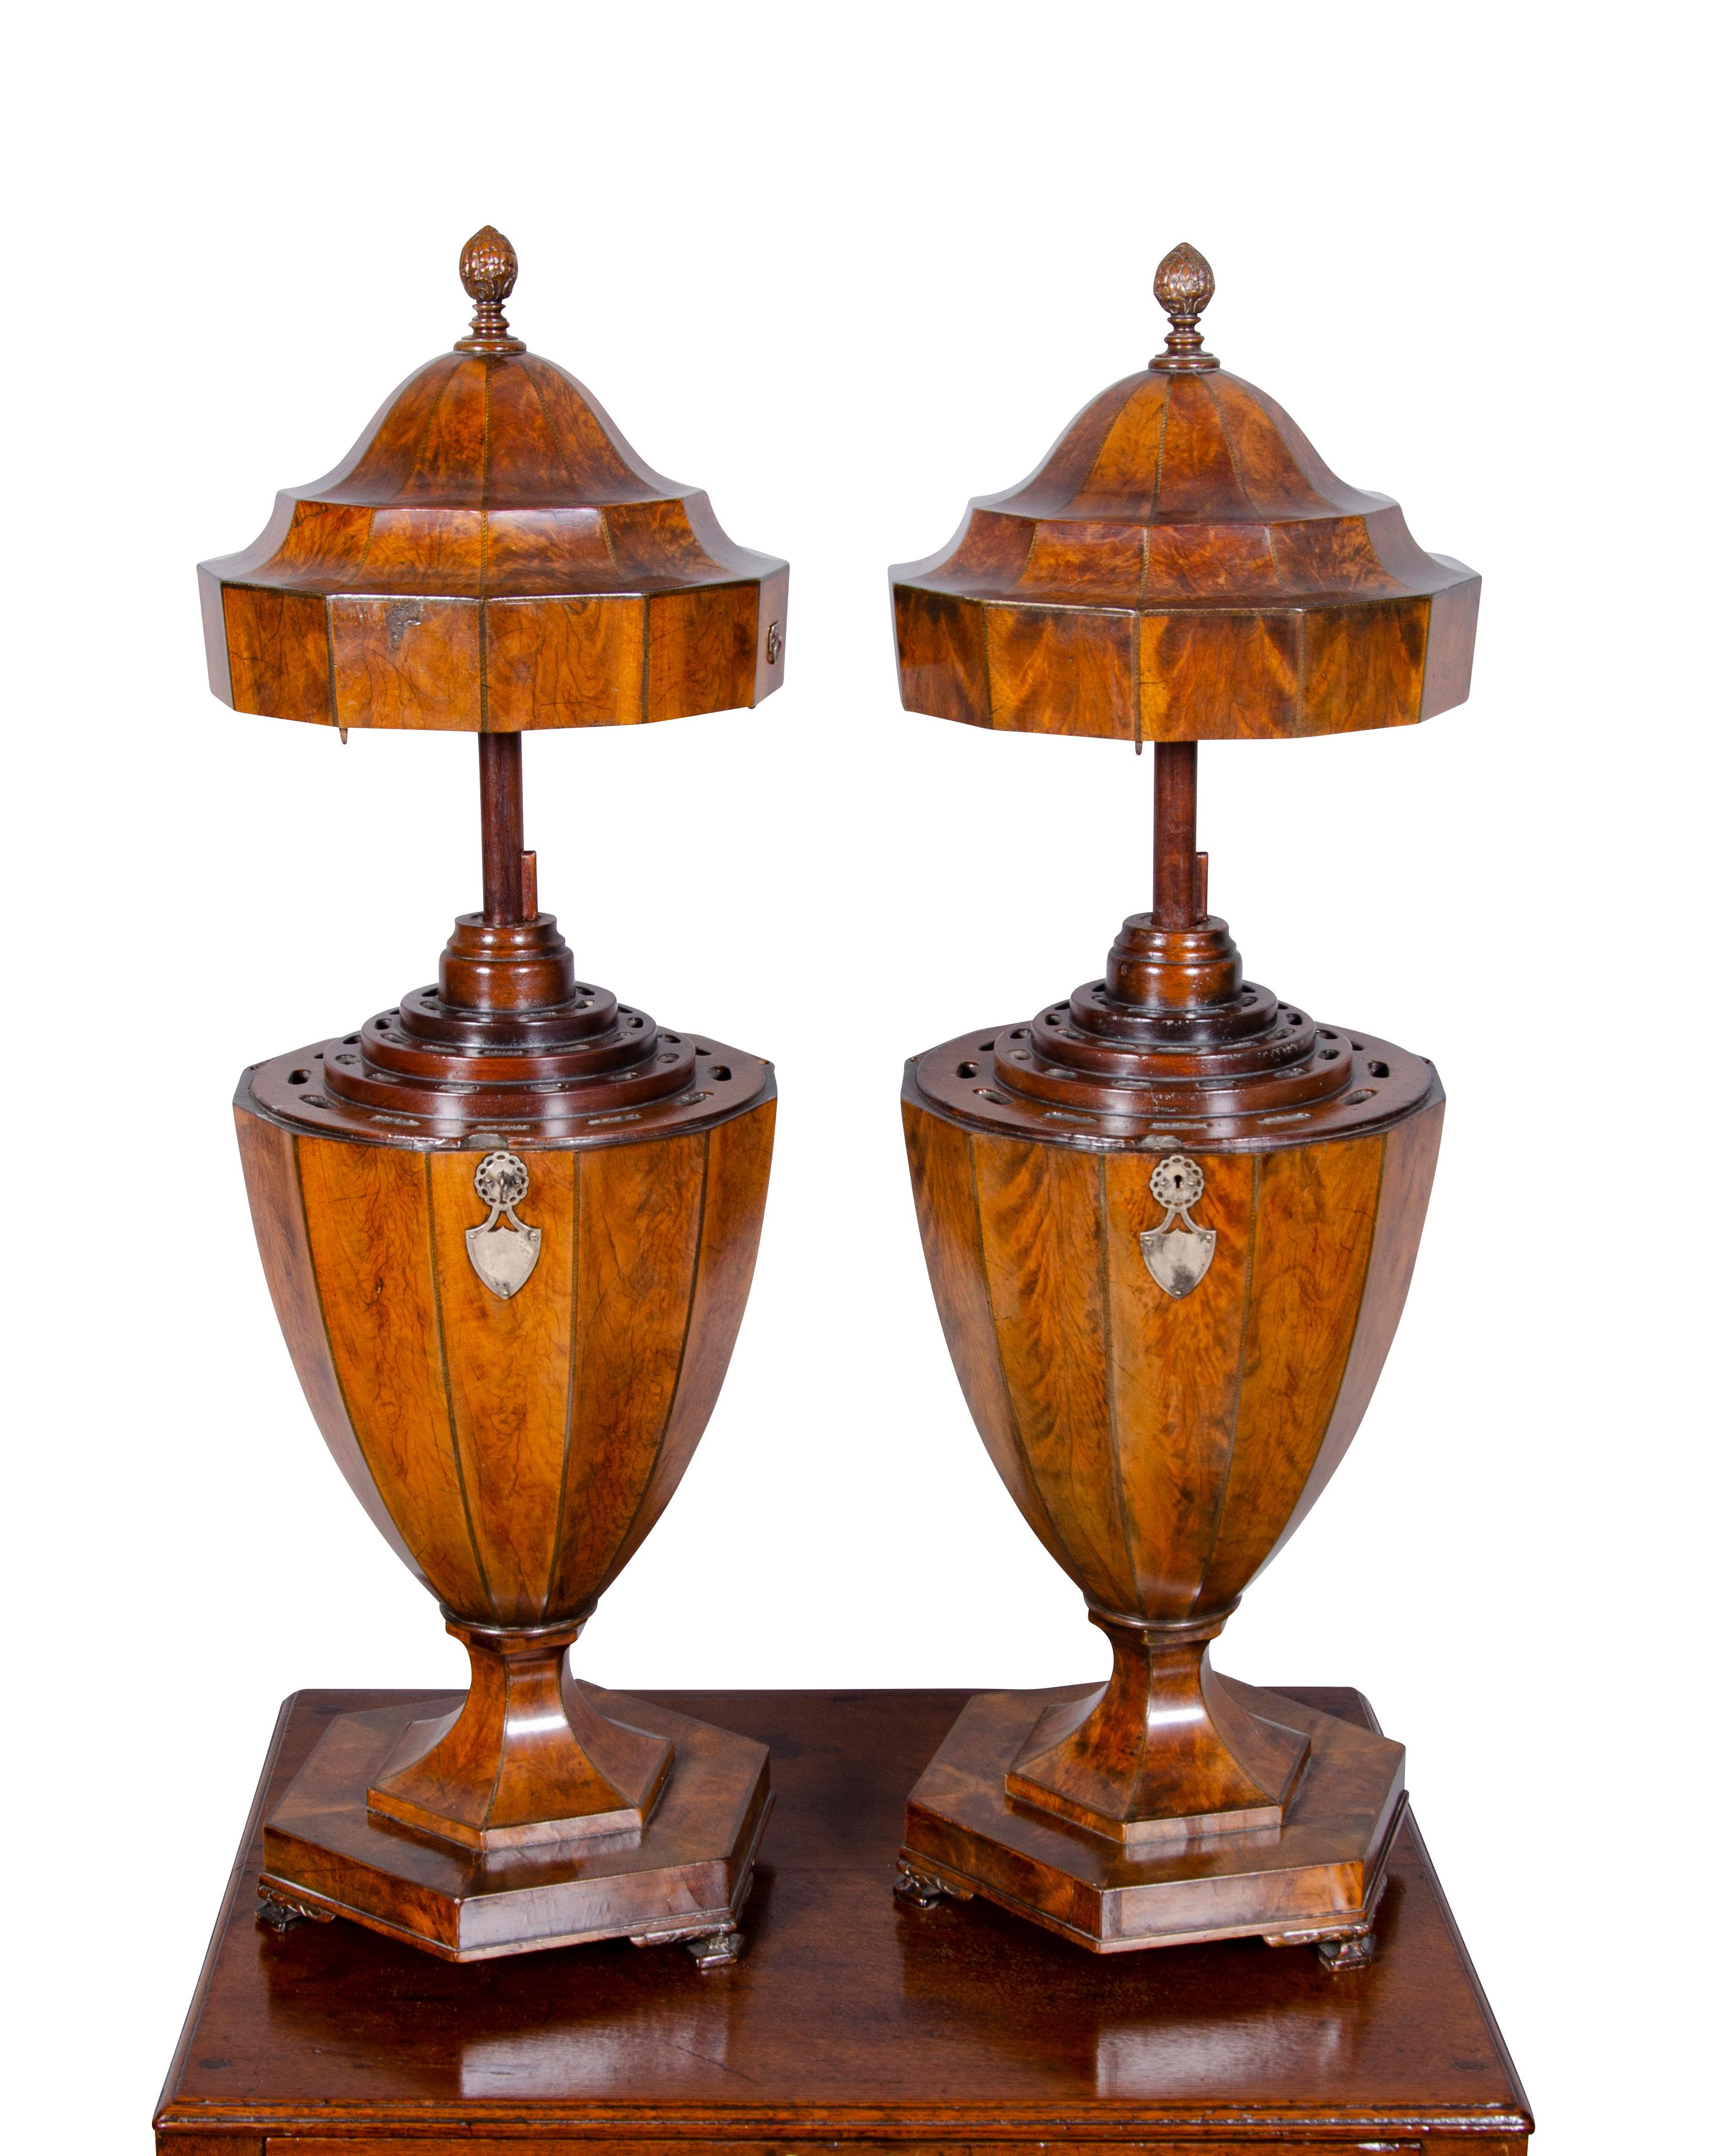 Urn form with arched cover with carved finial opening to expose cutlery slots, well figured mahogany with mellow brown color, silver escutcheons, octagonal base with bracket feet.